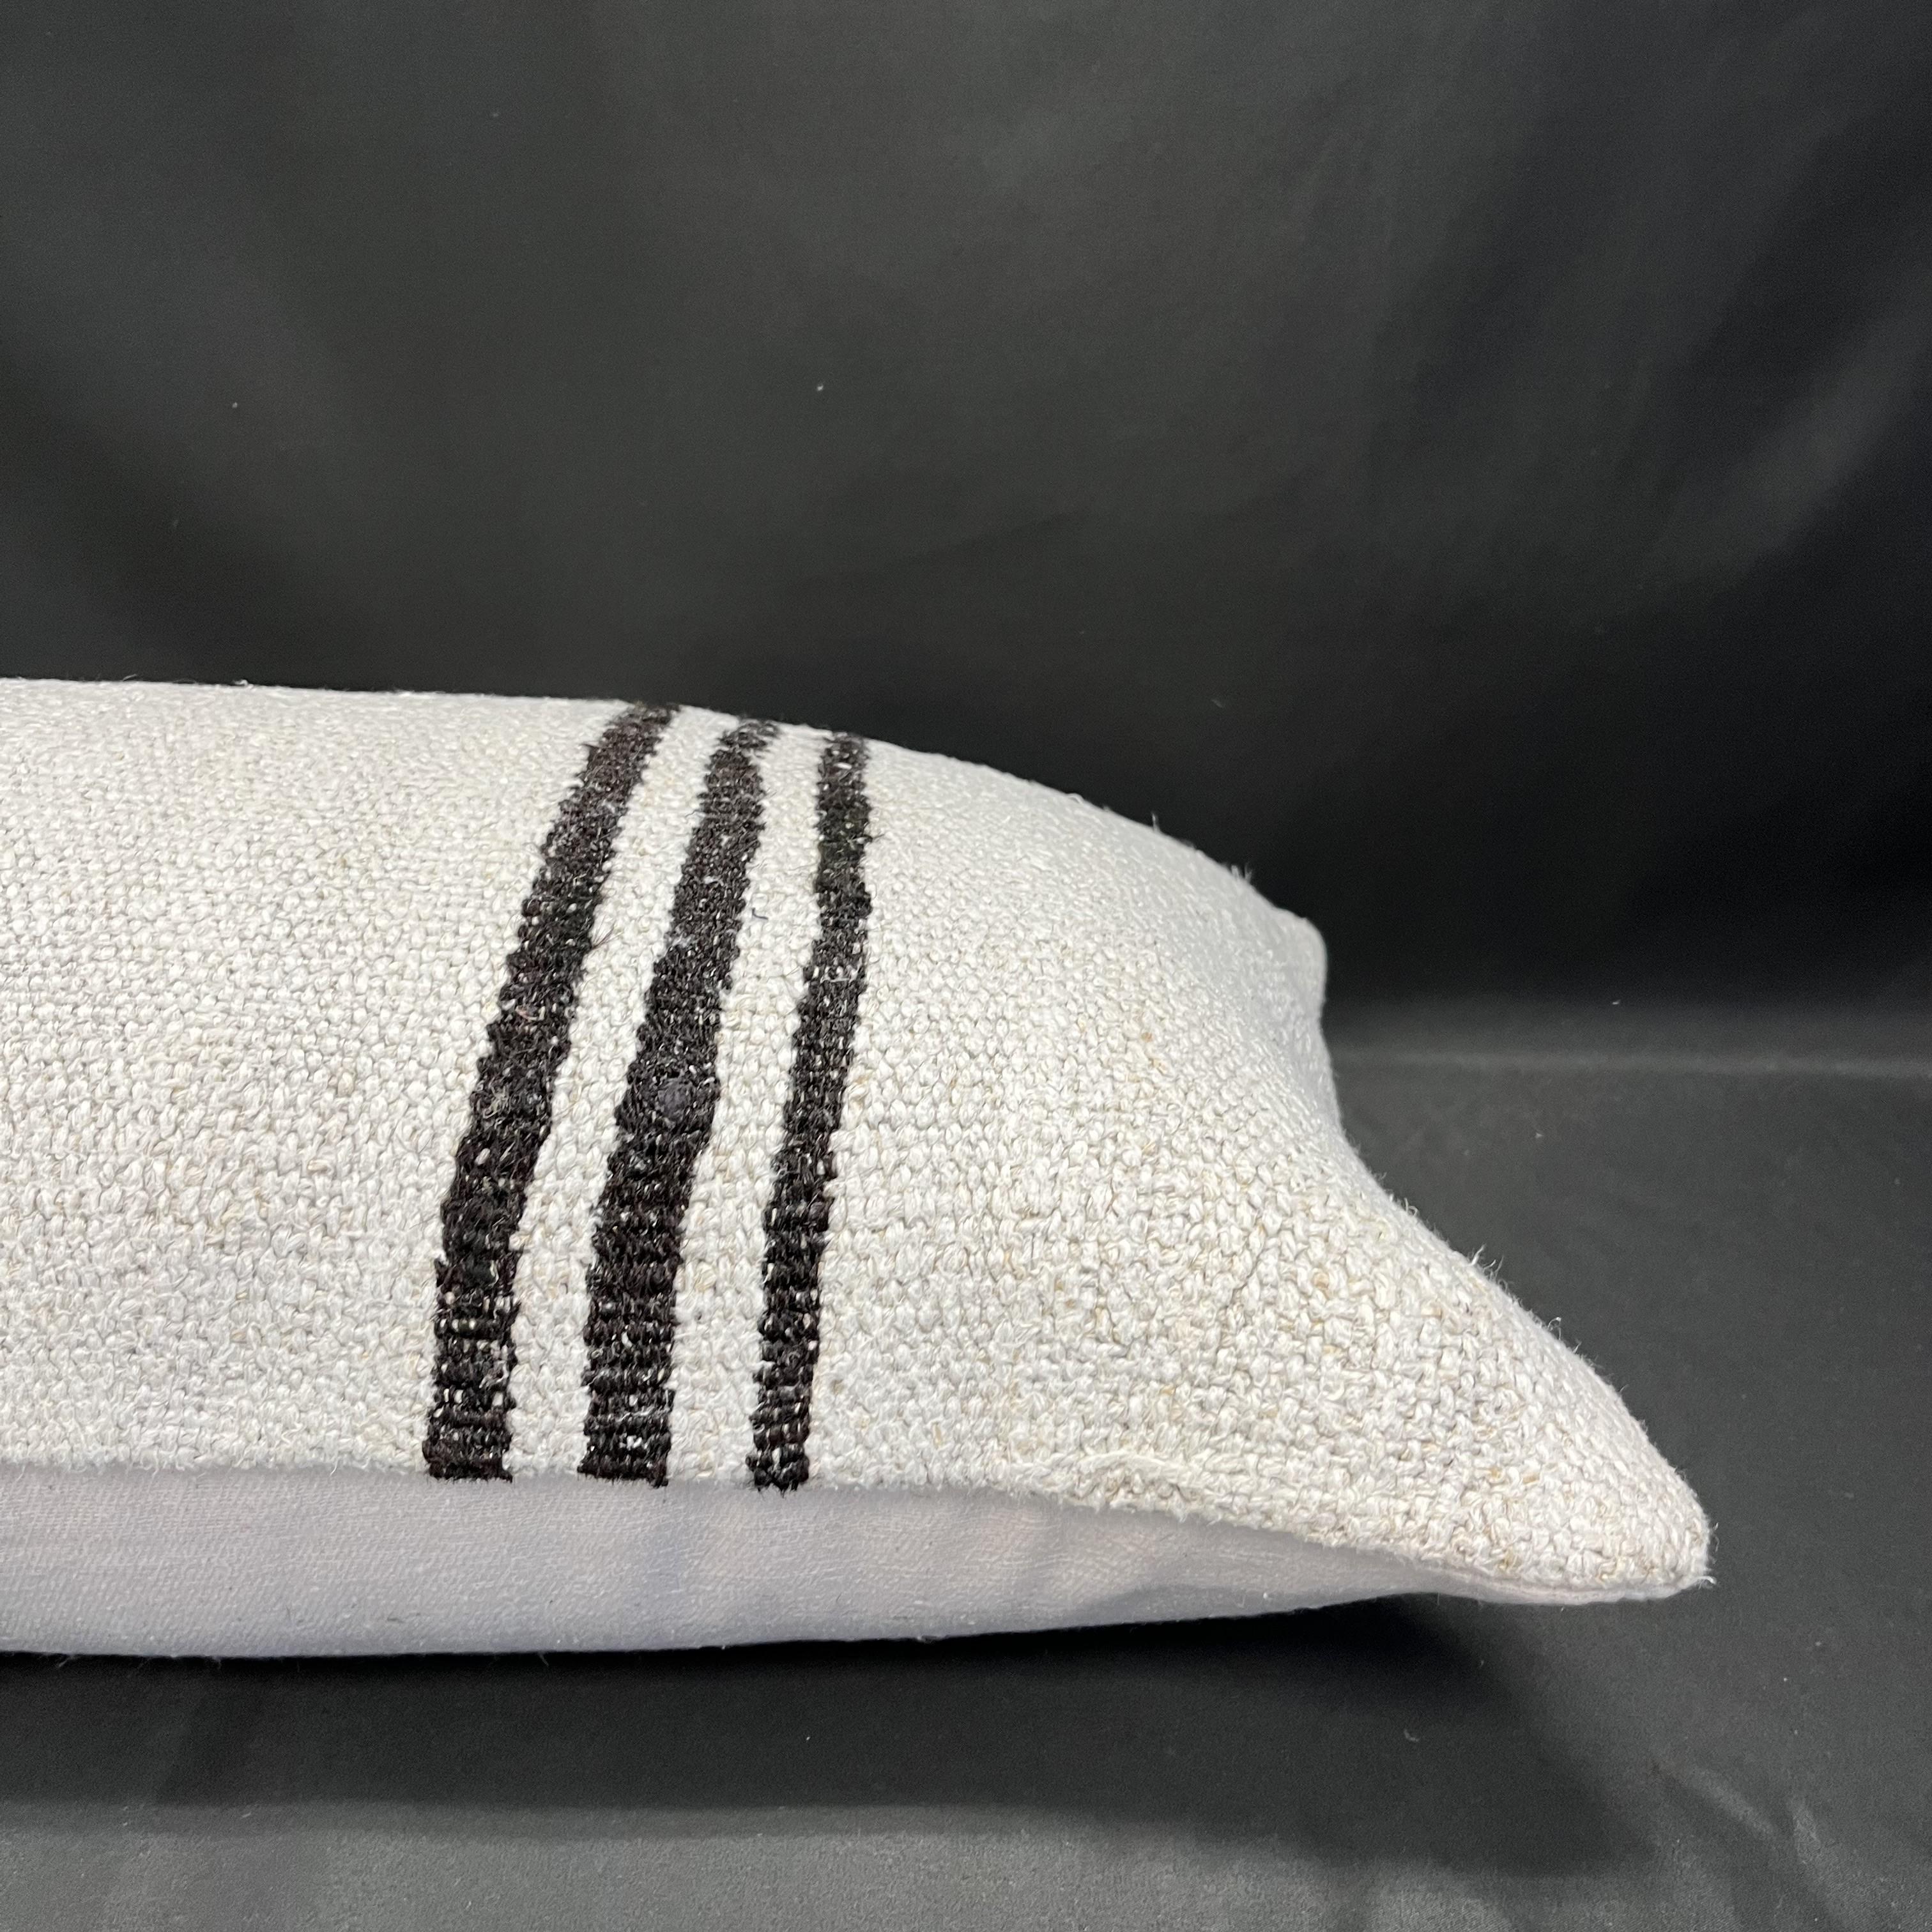 Hand-Woven Natural Hemp Pillow Cover Beige with Brown Striped Pattern 15